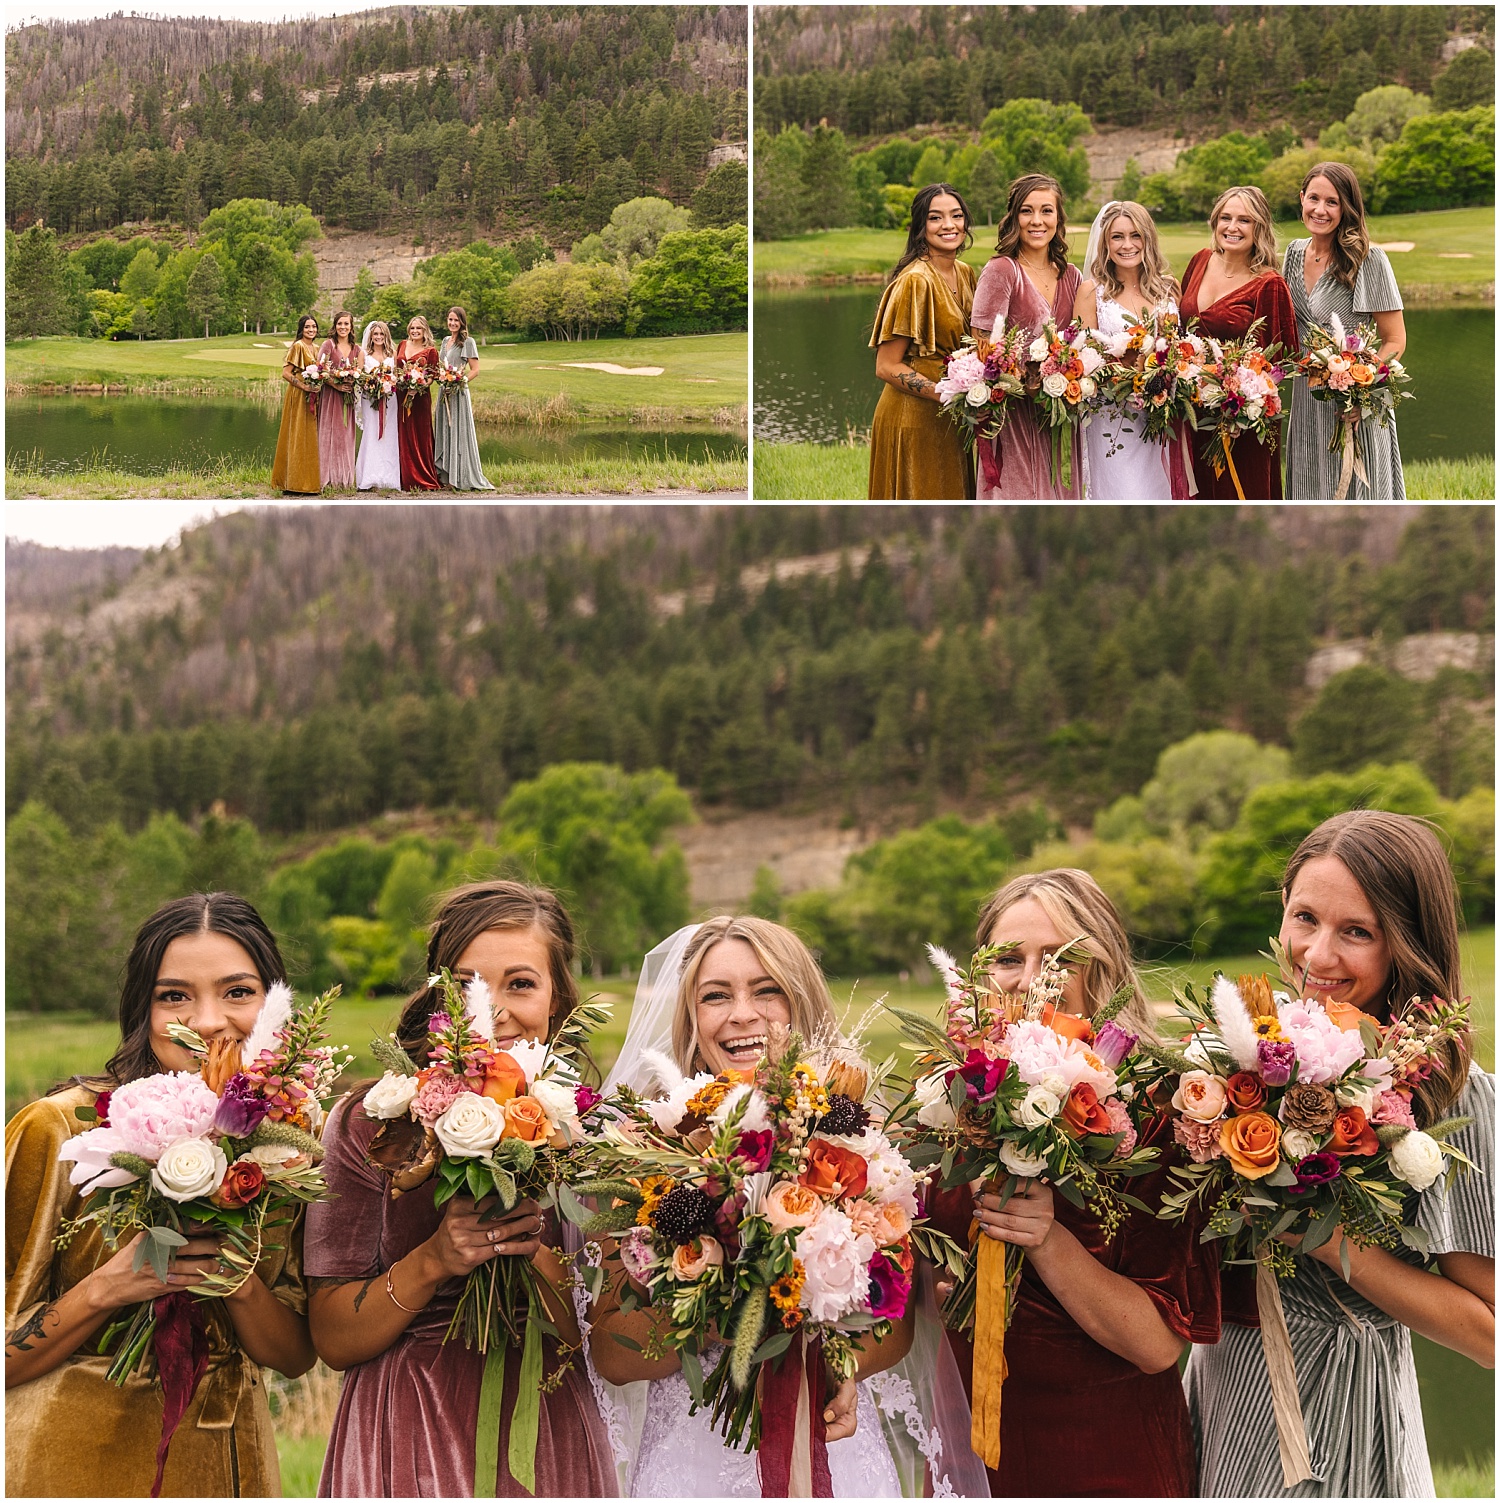 Bridesmaids with mismatched velvet dresses and colorful bouquets